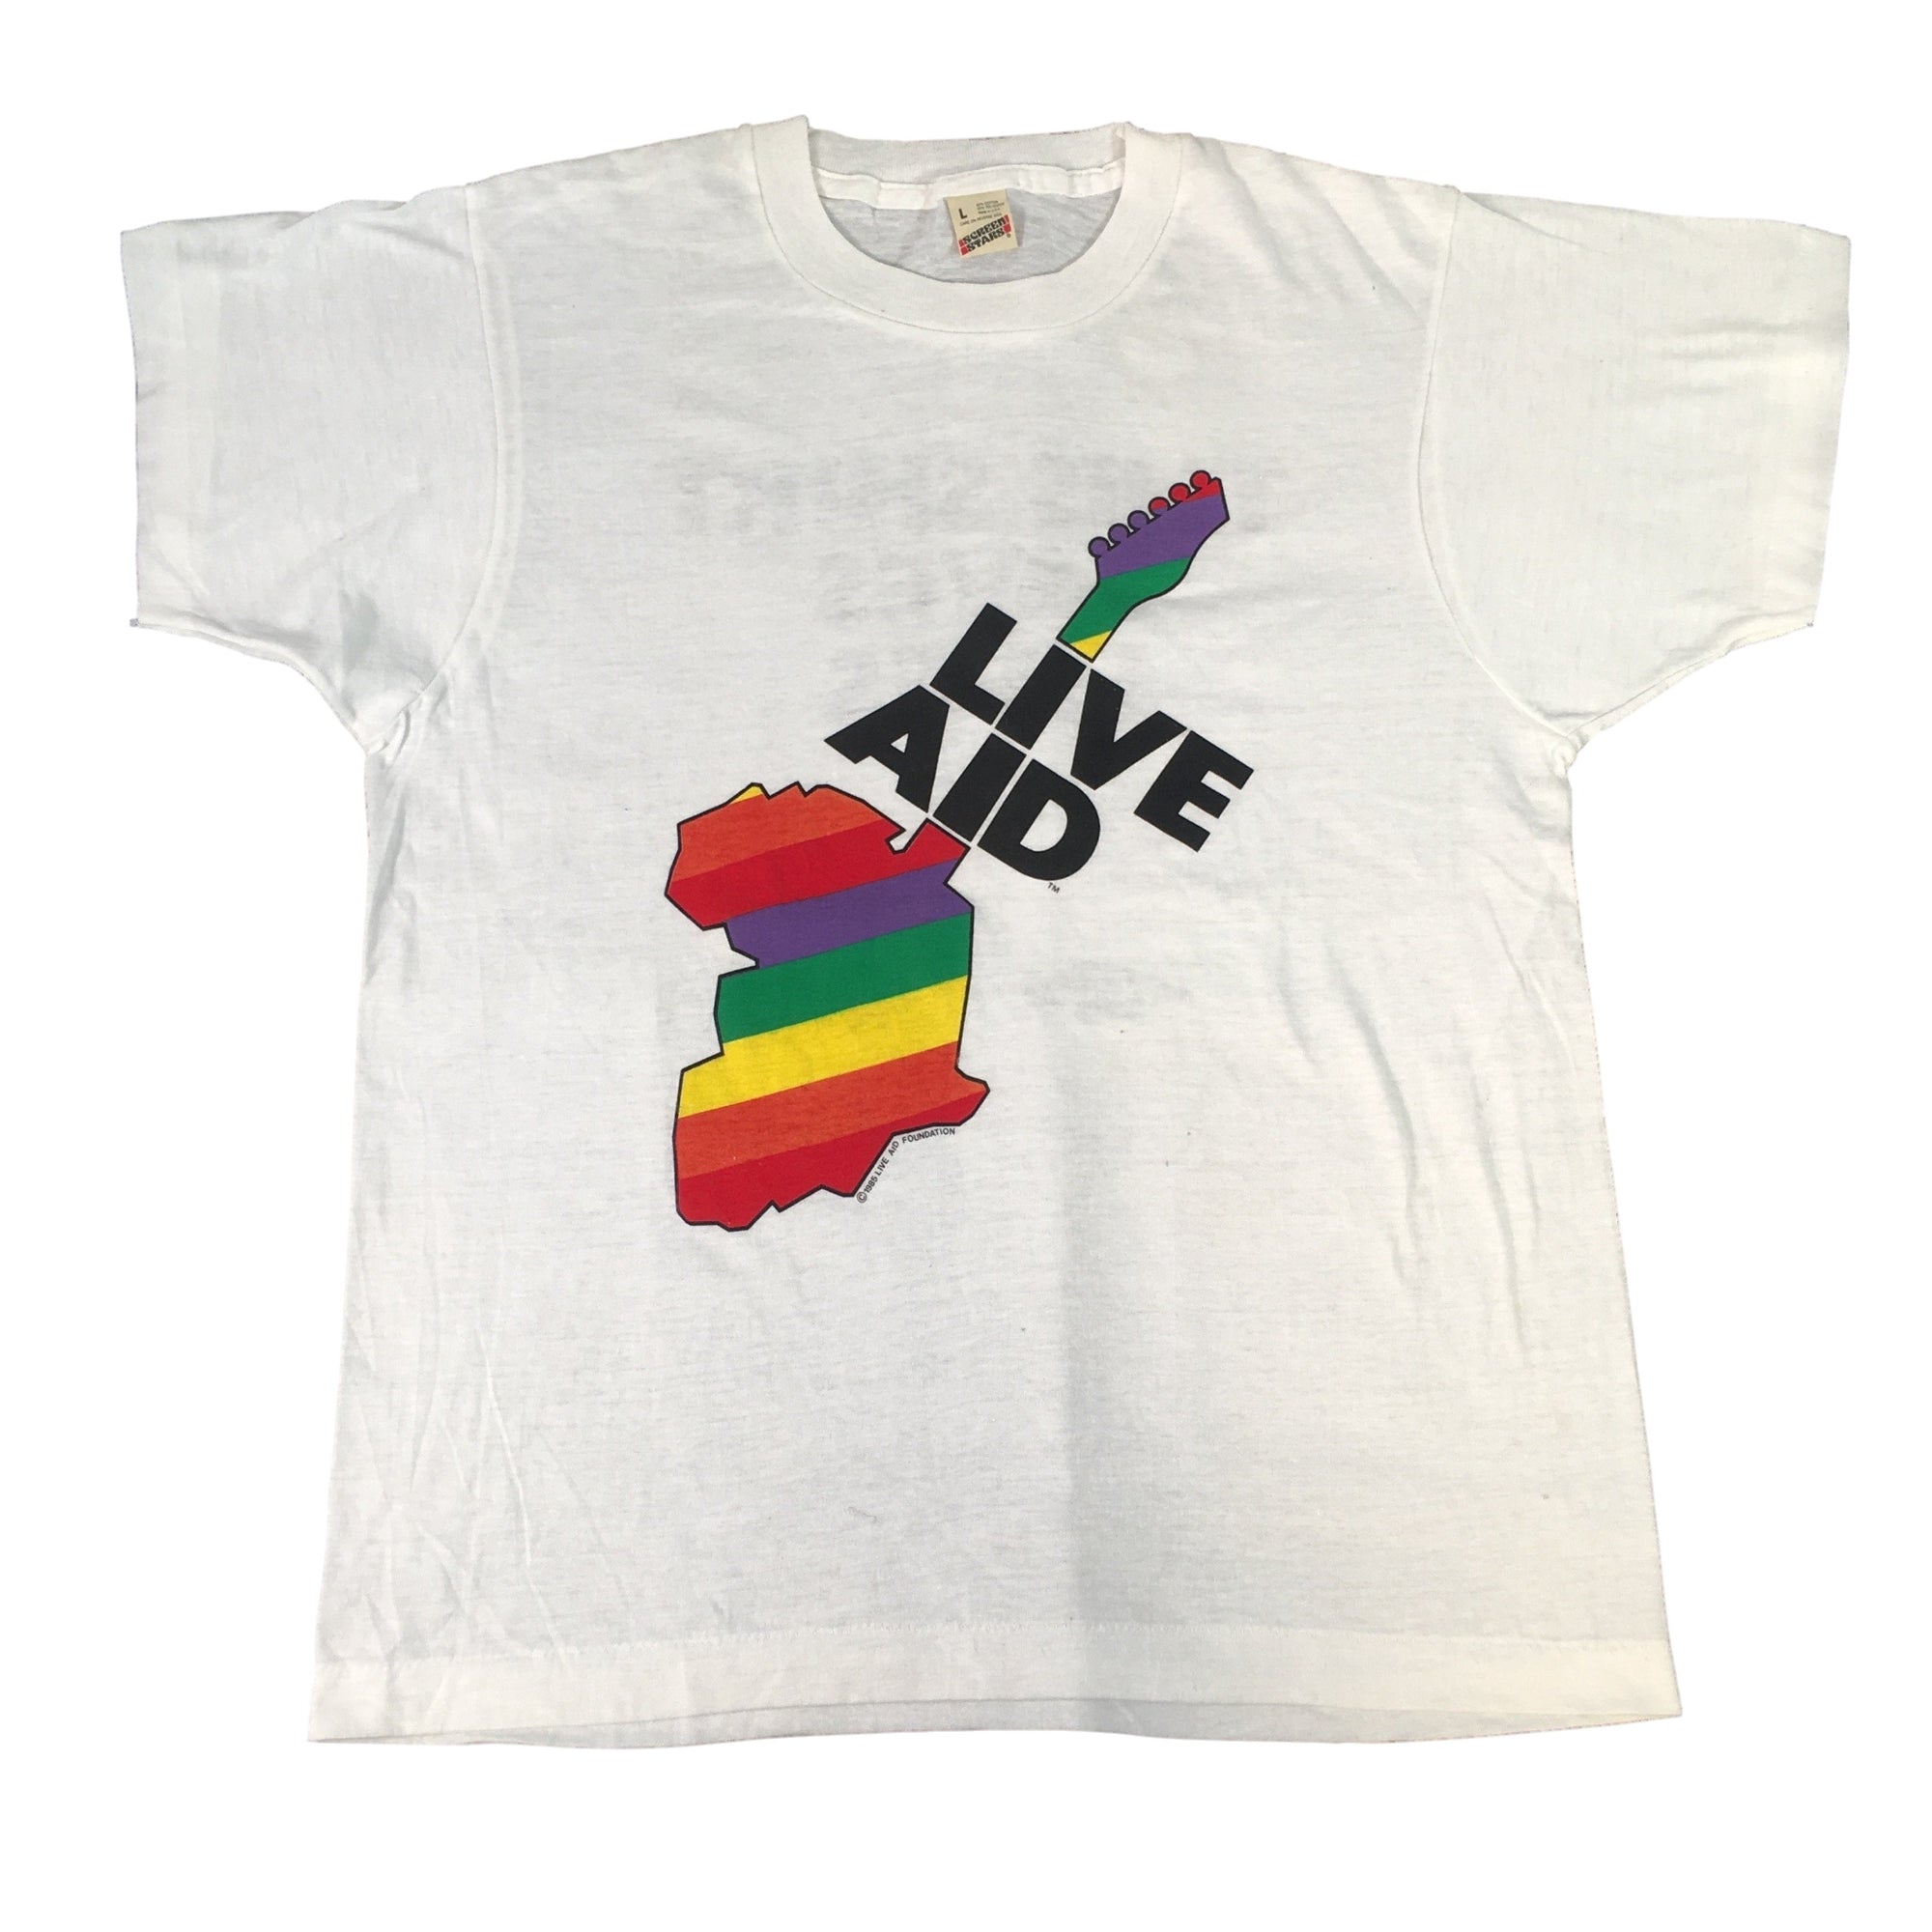 Vintage Live Aid "This Shirt Saves Lives" T-Shirt - jointcustodydc